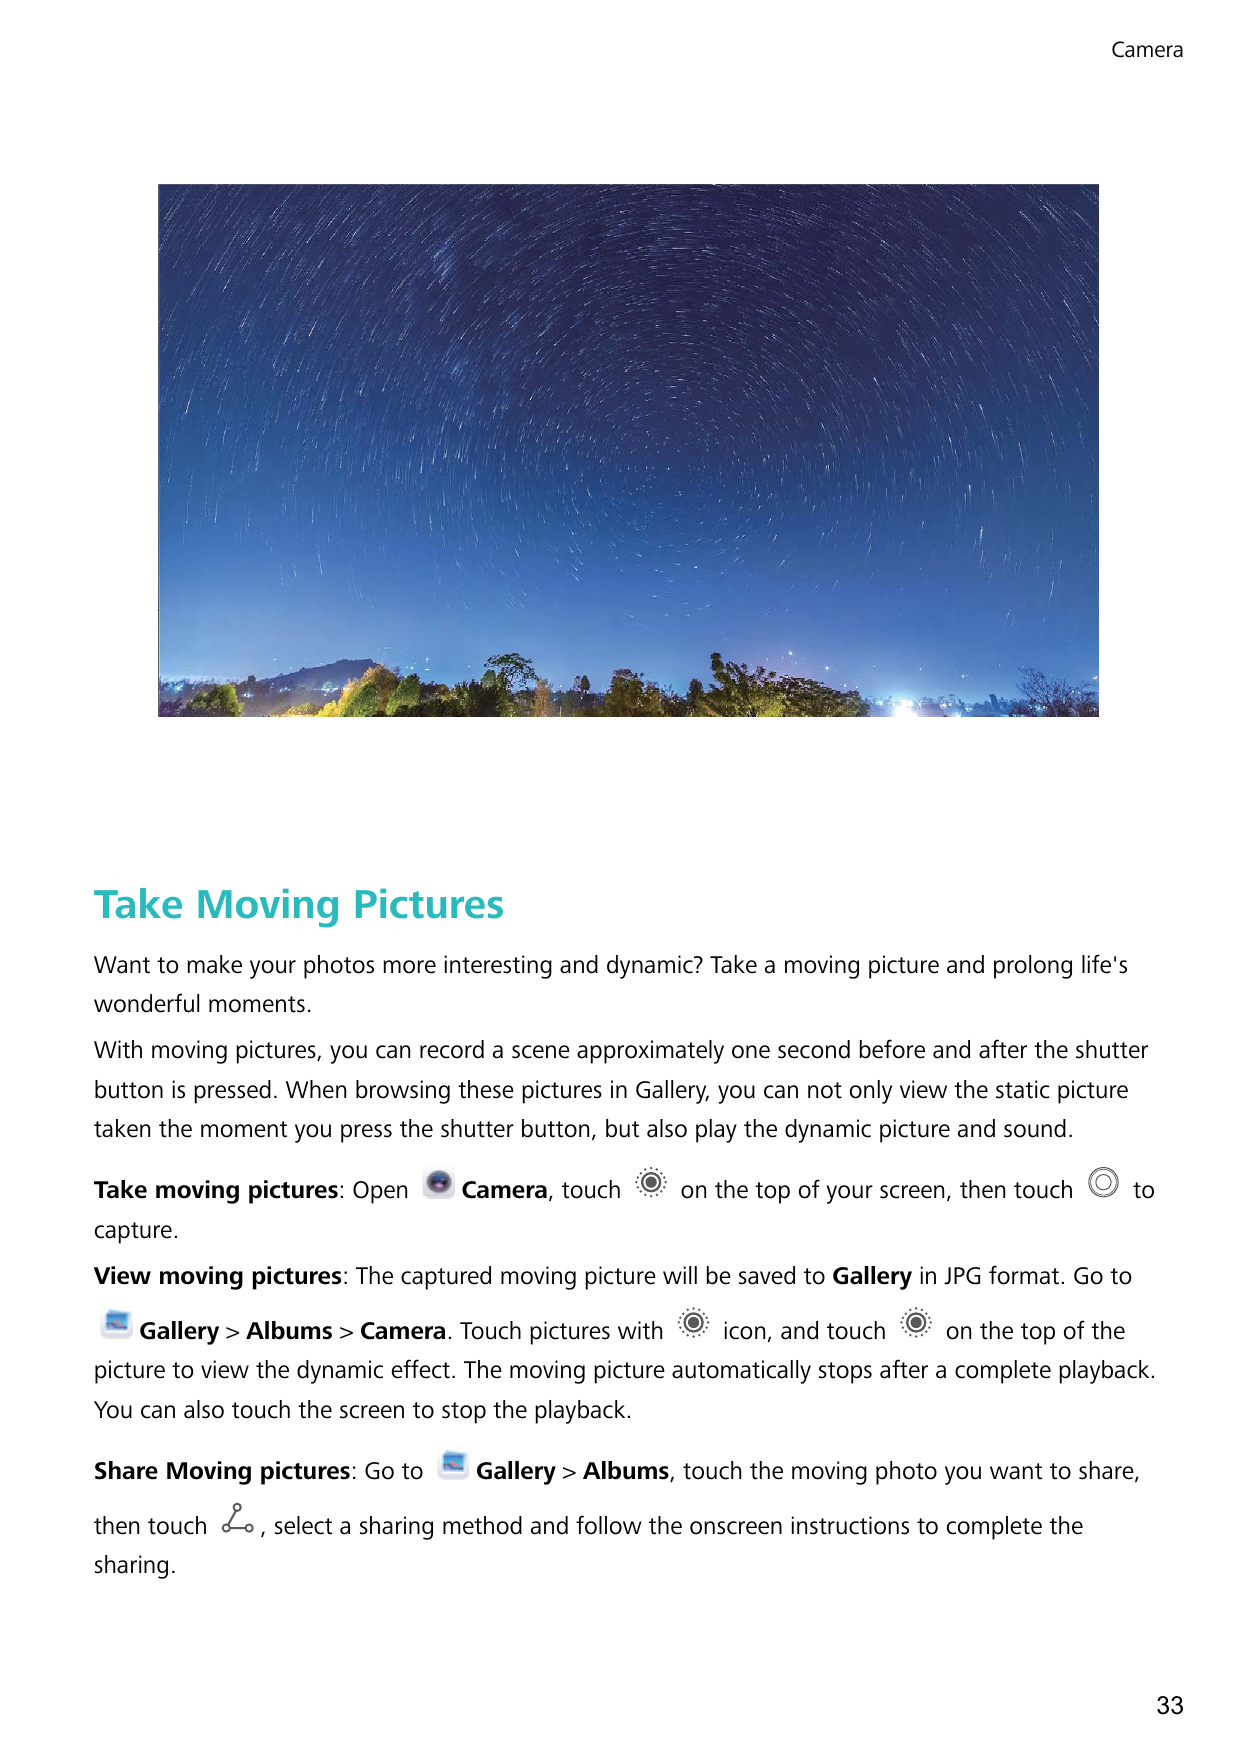 CameraTake Moving PicturesWant to make your photos more interesting and dynamic? Take a moving picture and prolong life'swonderf